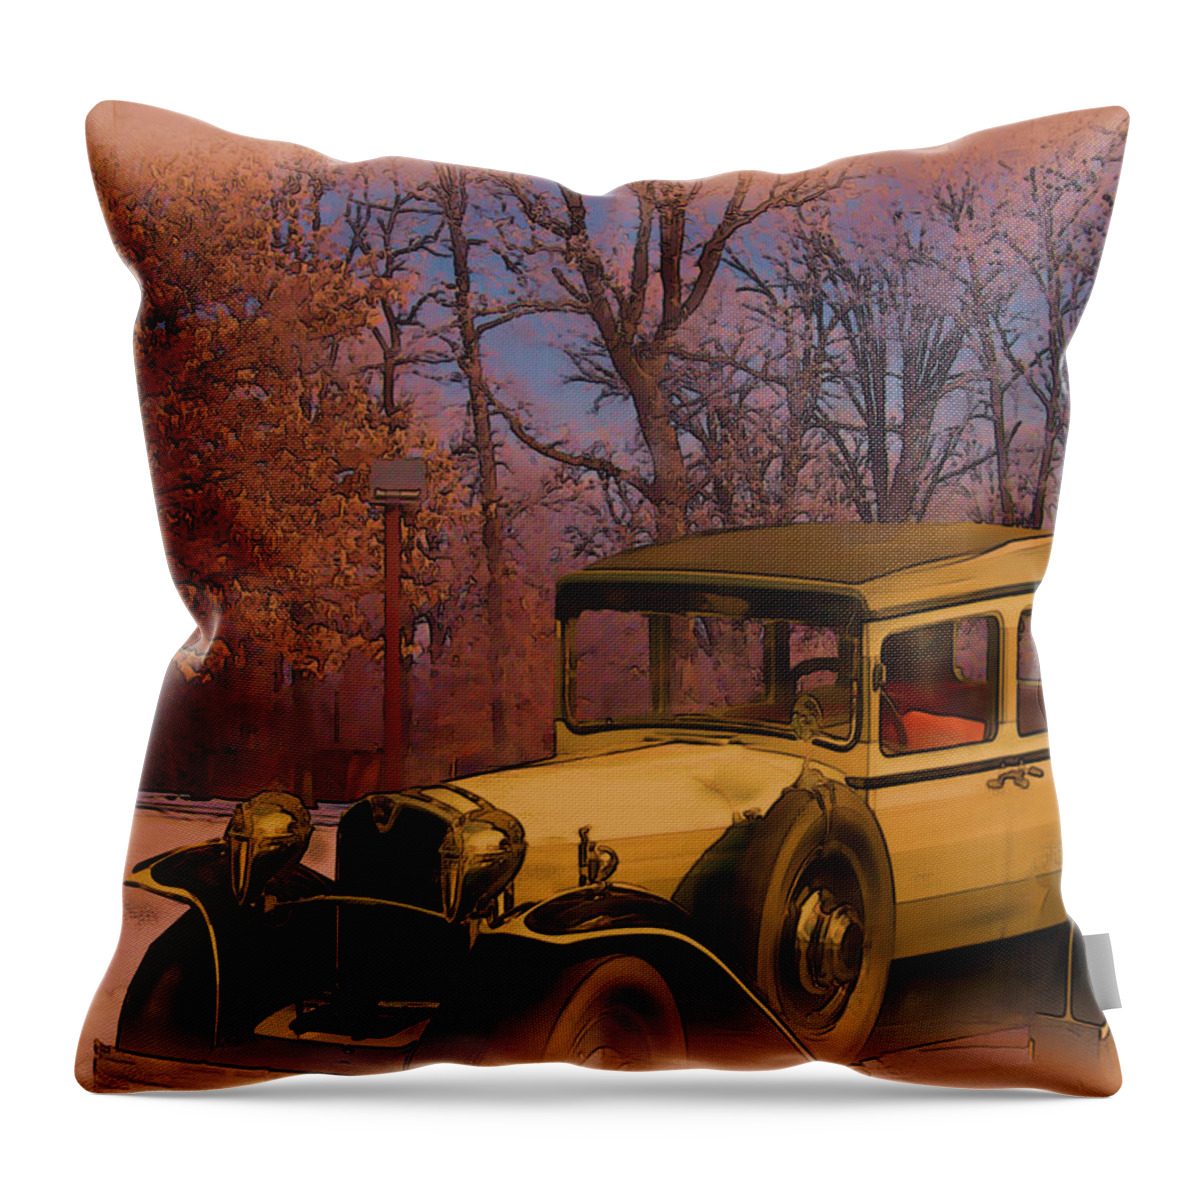 Vintage Throw Pillow featuring the digital art Vintage Auto in Winter by Tristan Armstrong